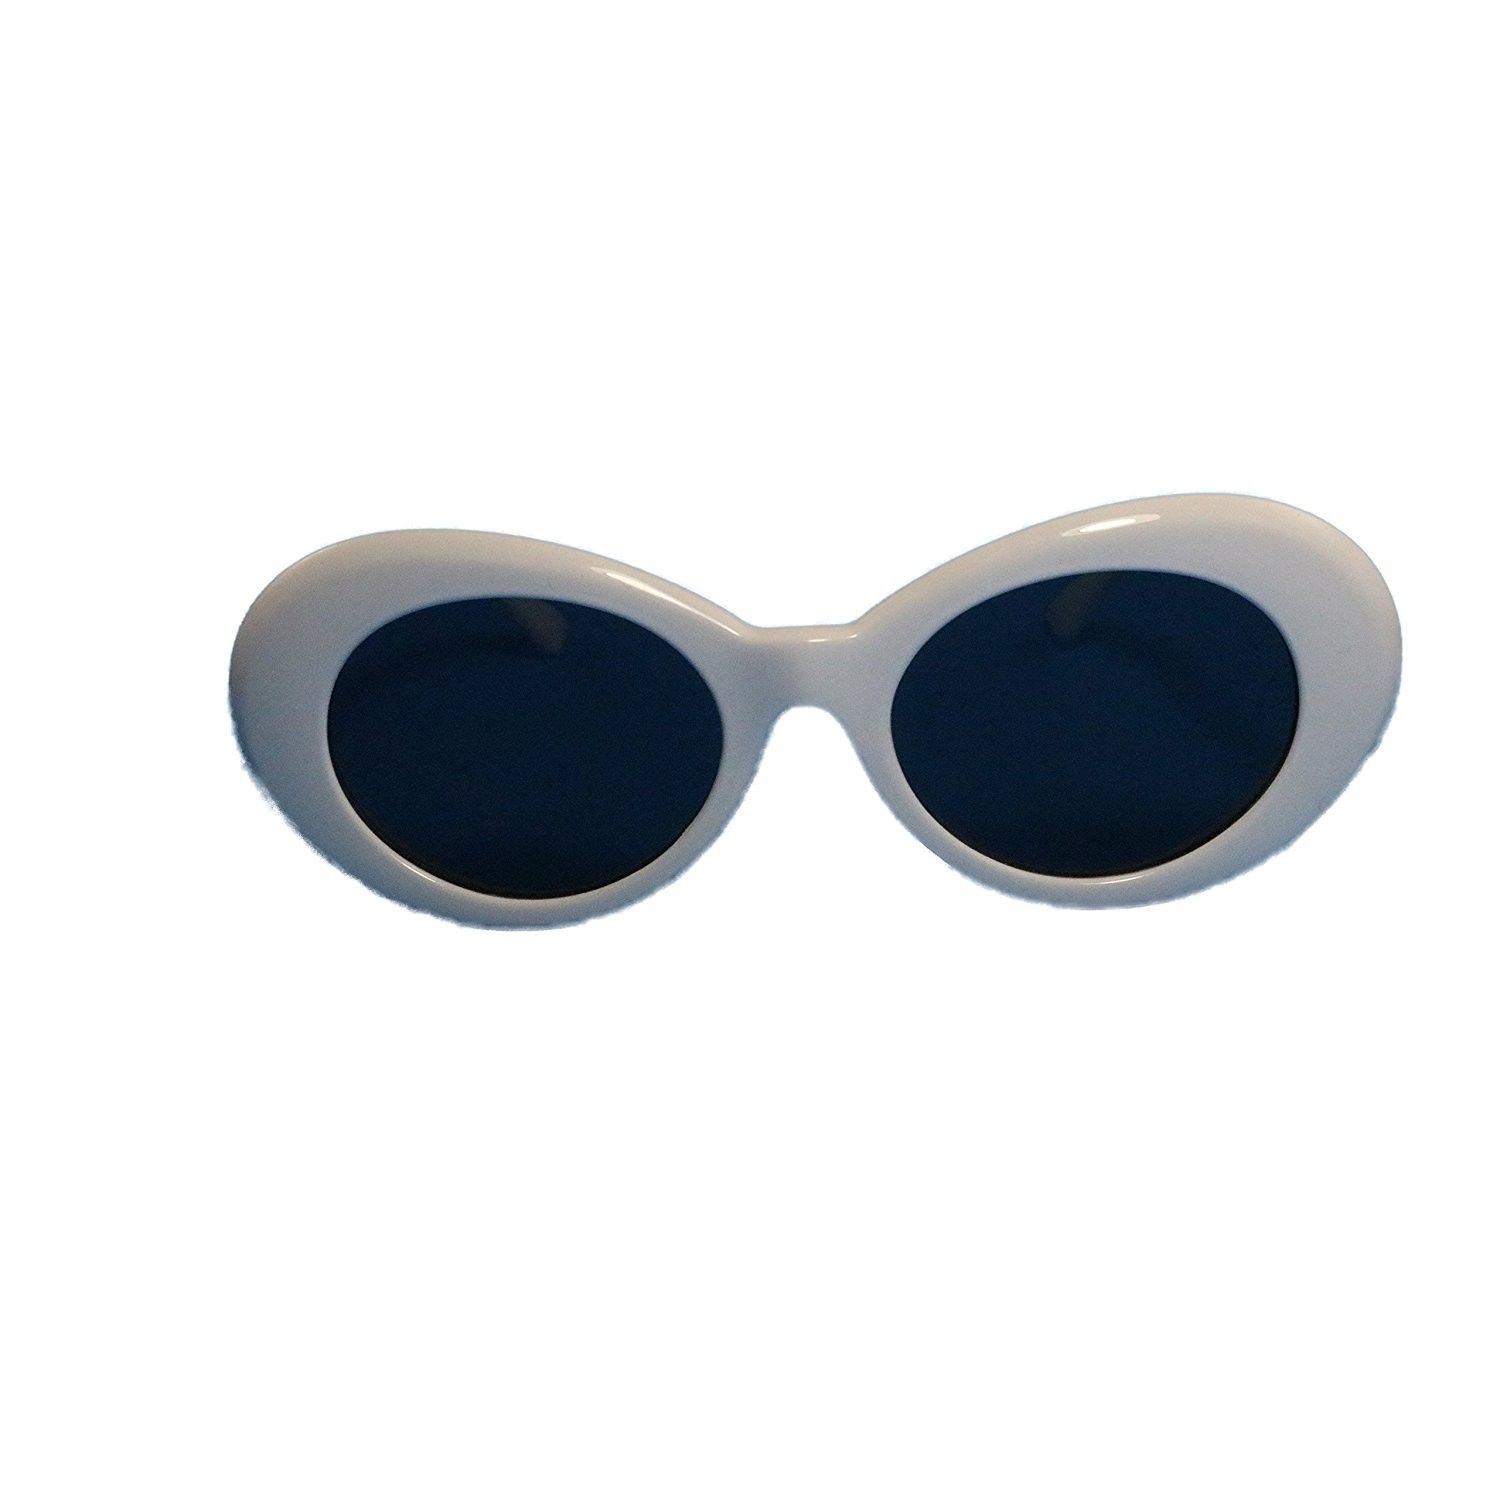 Clout Glasses Png